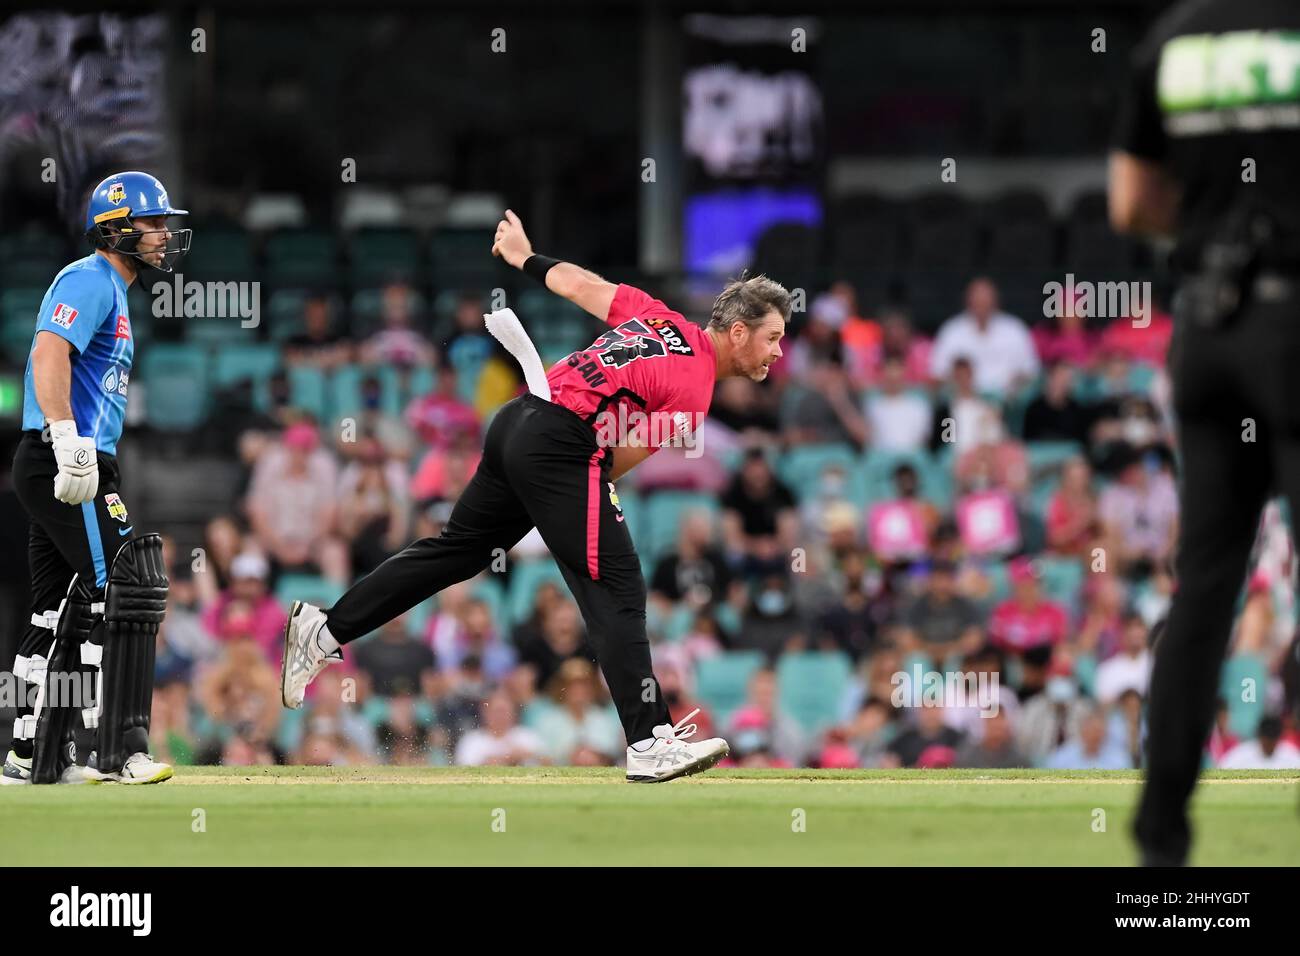 Sydney, Australia, 26 January, 2022. Dan Christian of the Sixers bowls during the Big Bash League Challenger cricket match between Sydney Sixers and Adelaide Strikers at The Sydney Cricket Ground on January 26, 2022 in Sydney, Australia. Credit: Steven Markham/Speed Media/Alamy Live News Stock Photo